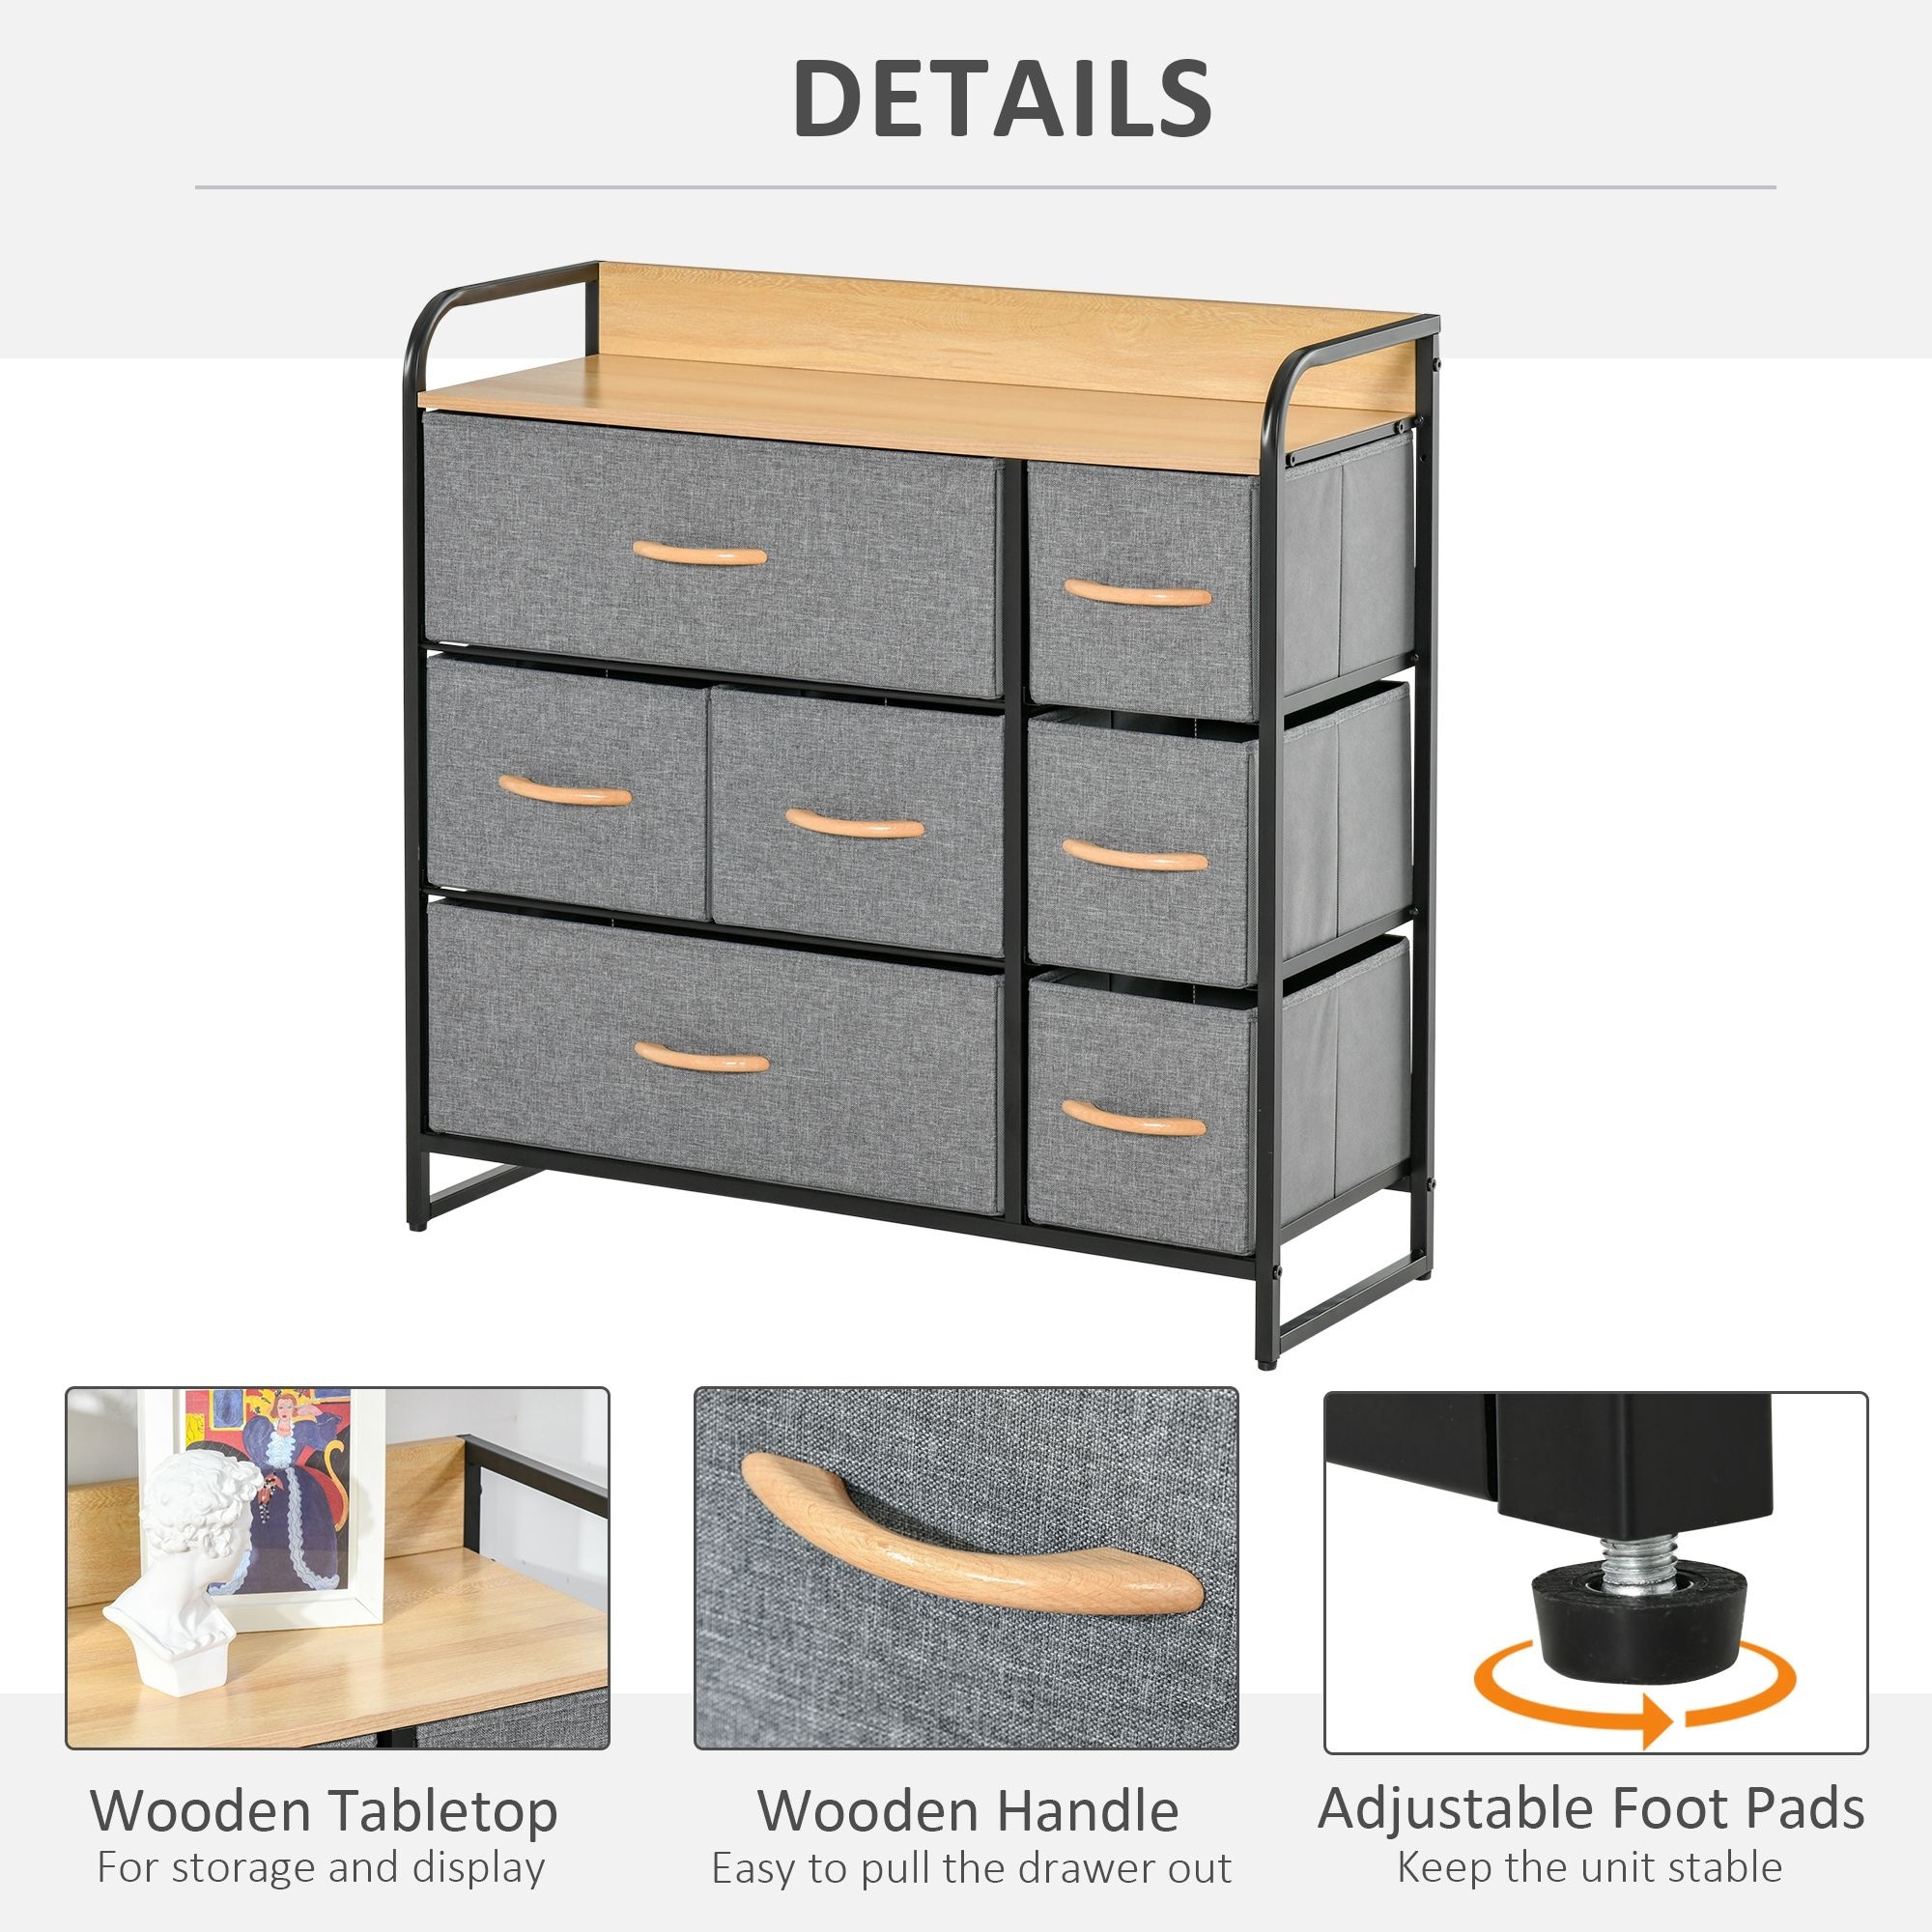 https://ak1.ostkcdn.com/images/products/is/images/direct/b59e326e887bd6727055bf77b640cfb155bd2eff/HOMCOM-7-Drawer-Dresser%2C-Fabric-Chest-of-Drawers%2C-3-Tier-Storage-Organizer-for-Bedroom-Hallway-Entryway%2C-Steel-Frame-Wooden-Top.jpg